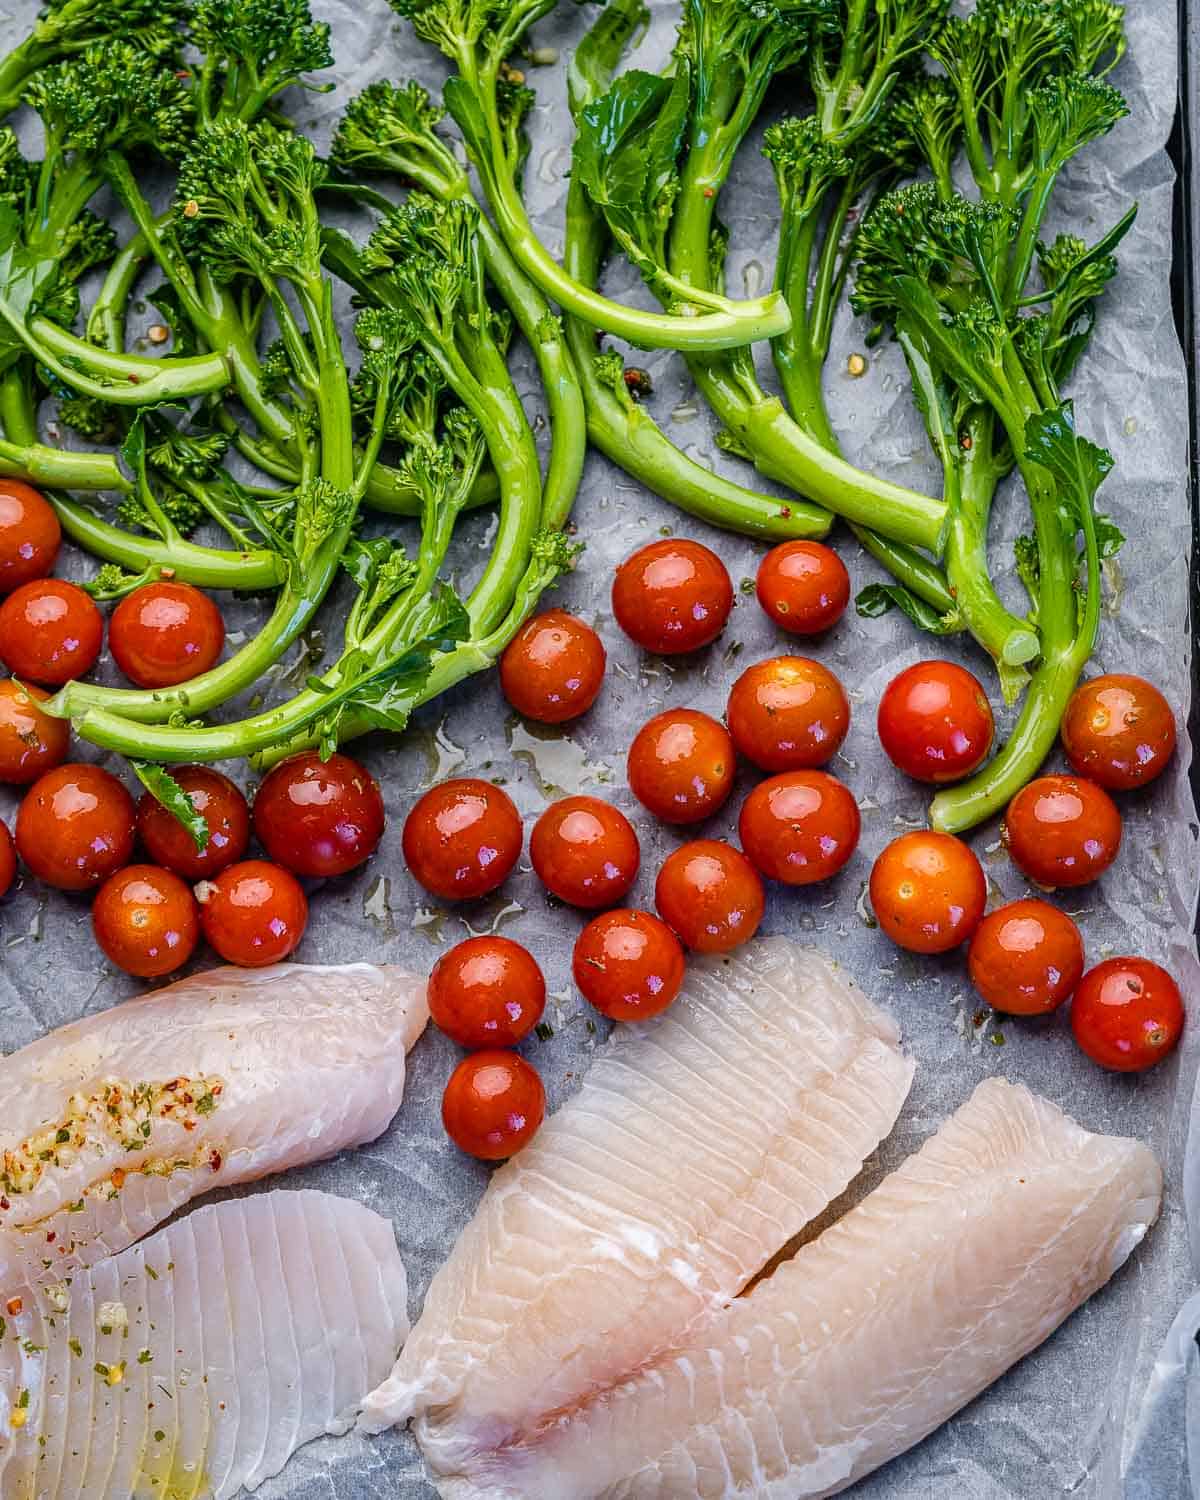 sheet pan with tilapia fillets, broccolini, and tomatoes